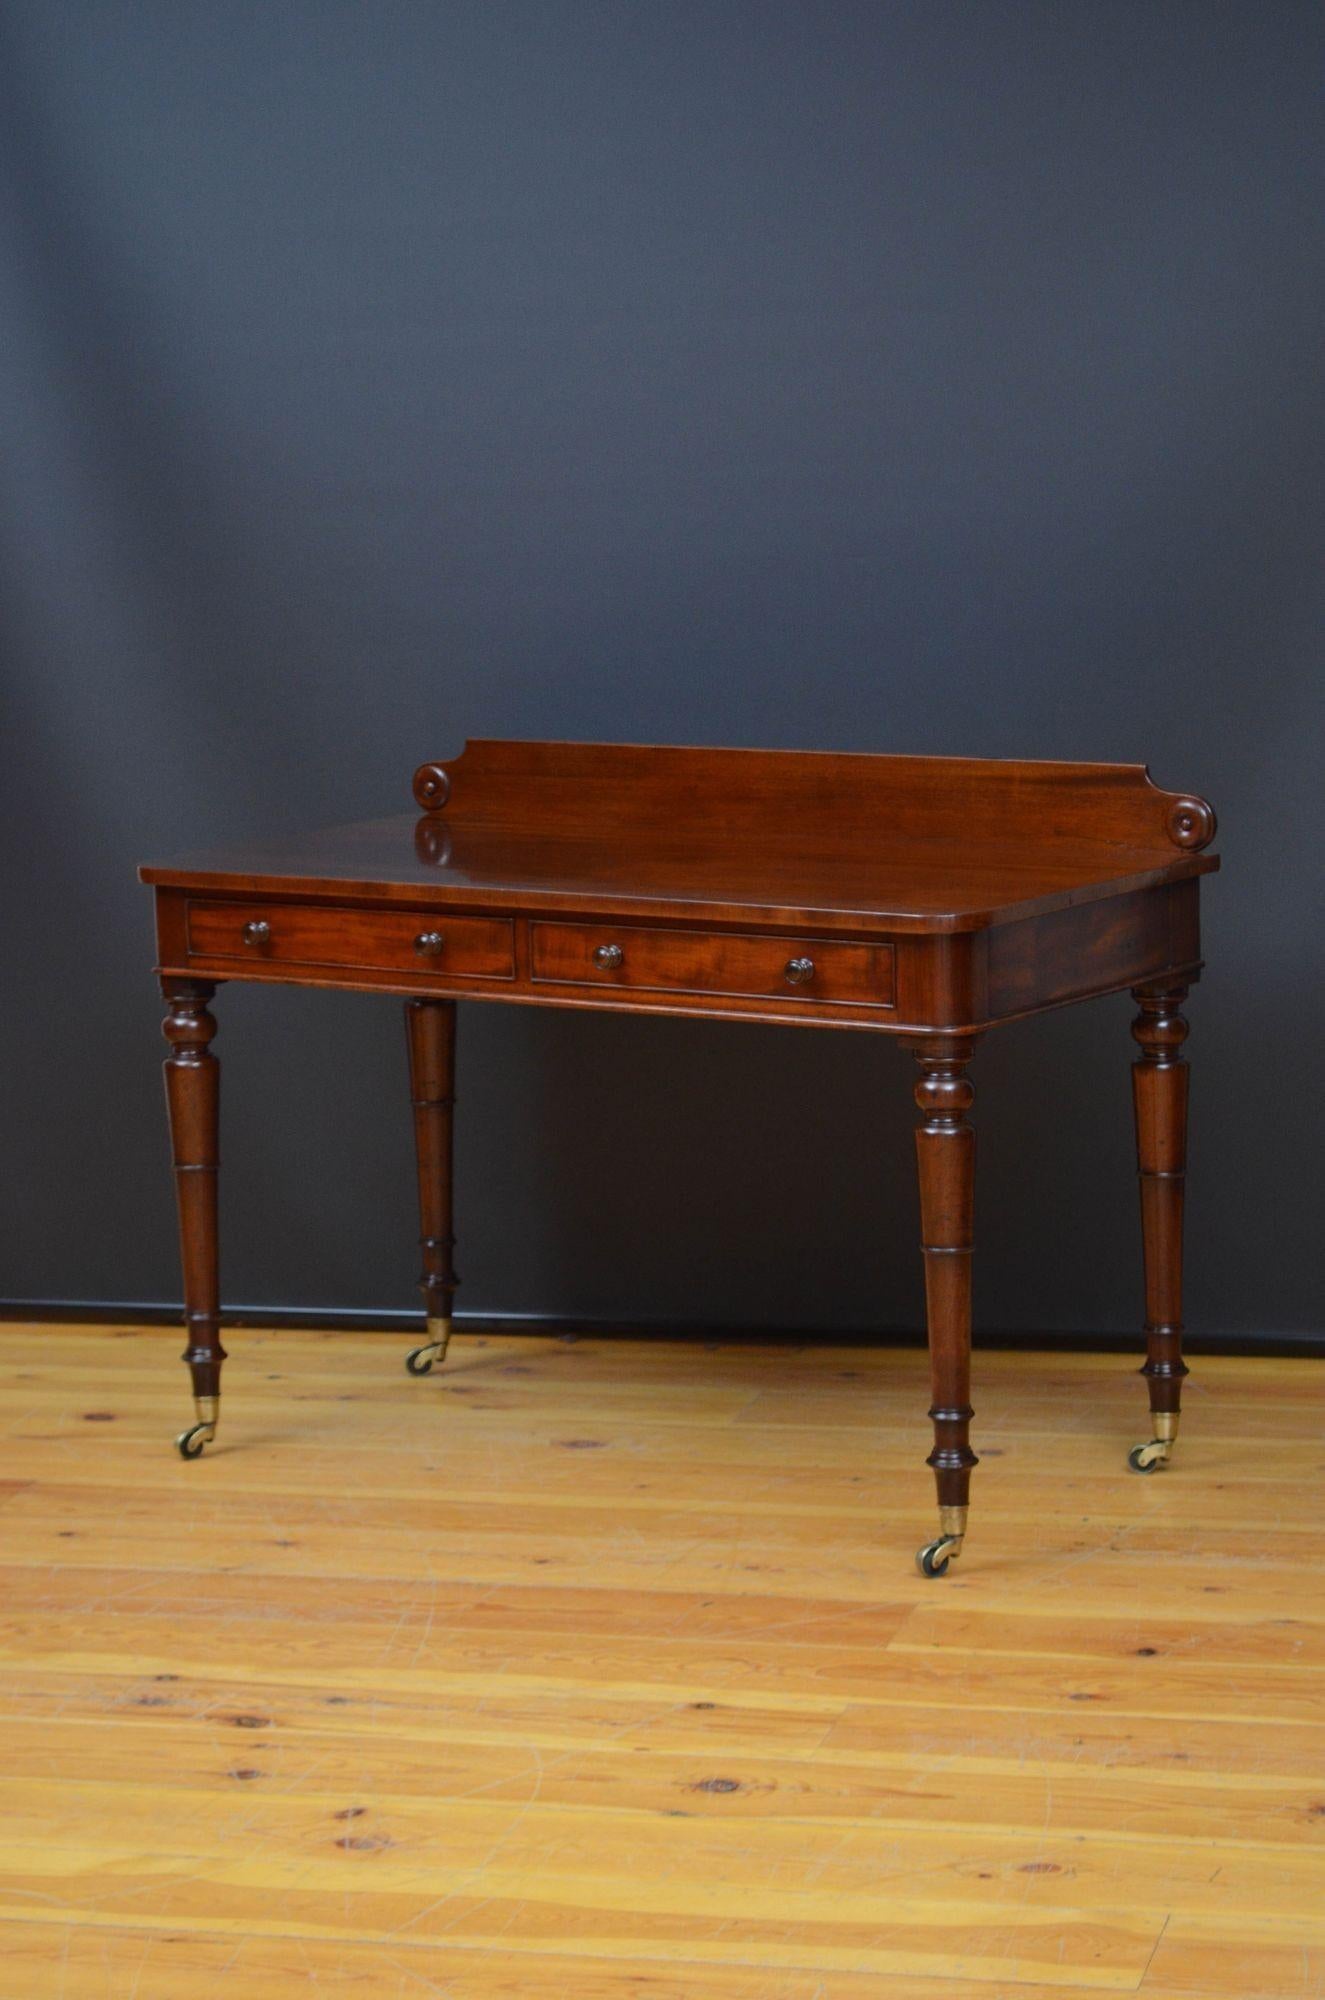 Sn5547 Fine quality and very attractive William IV figured mahogany dressing table / writing table, having shaped and carved upstand to the back edge, figured top and two mahogany lined cockbeaded drawers fitted with turned knobs, all standing on